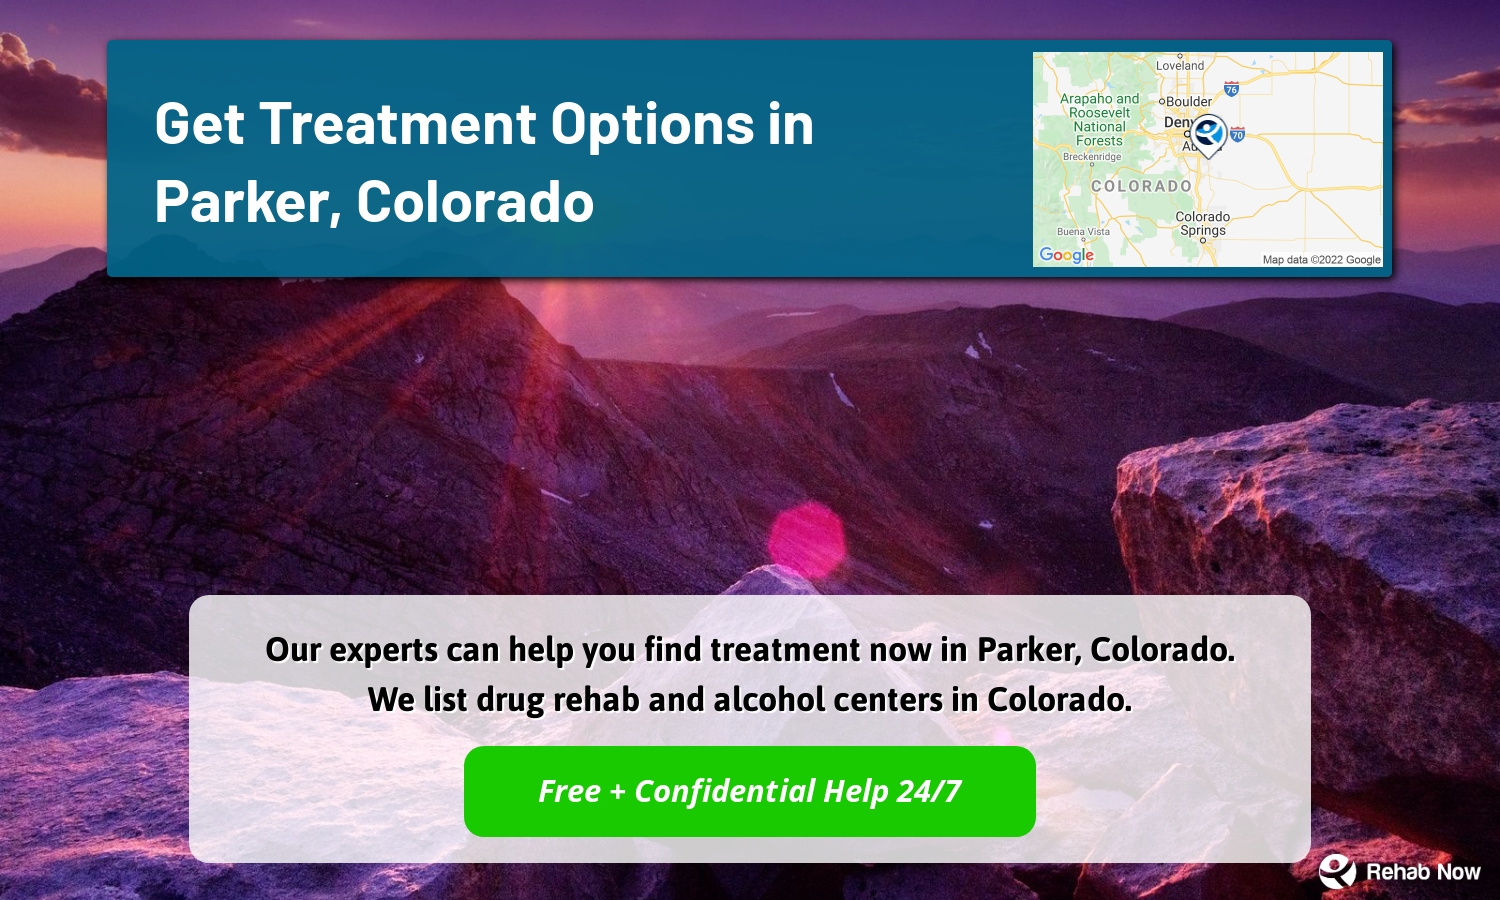 Our experts can help you find treatment now in Parker, Colorado. We list drug rehab and alcohol centers in Colorado.